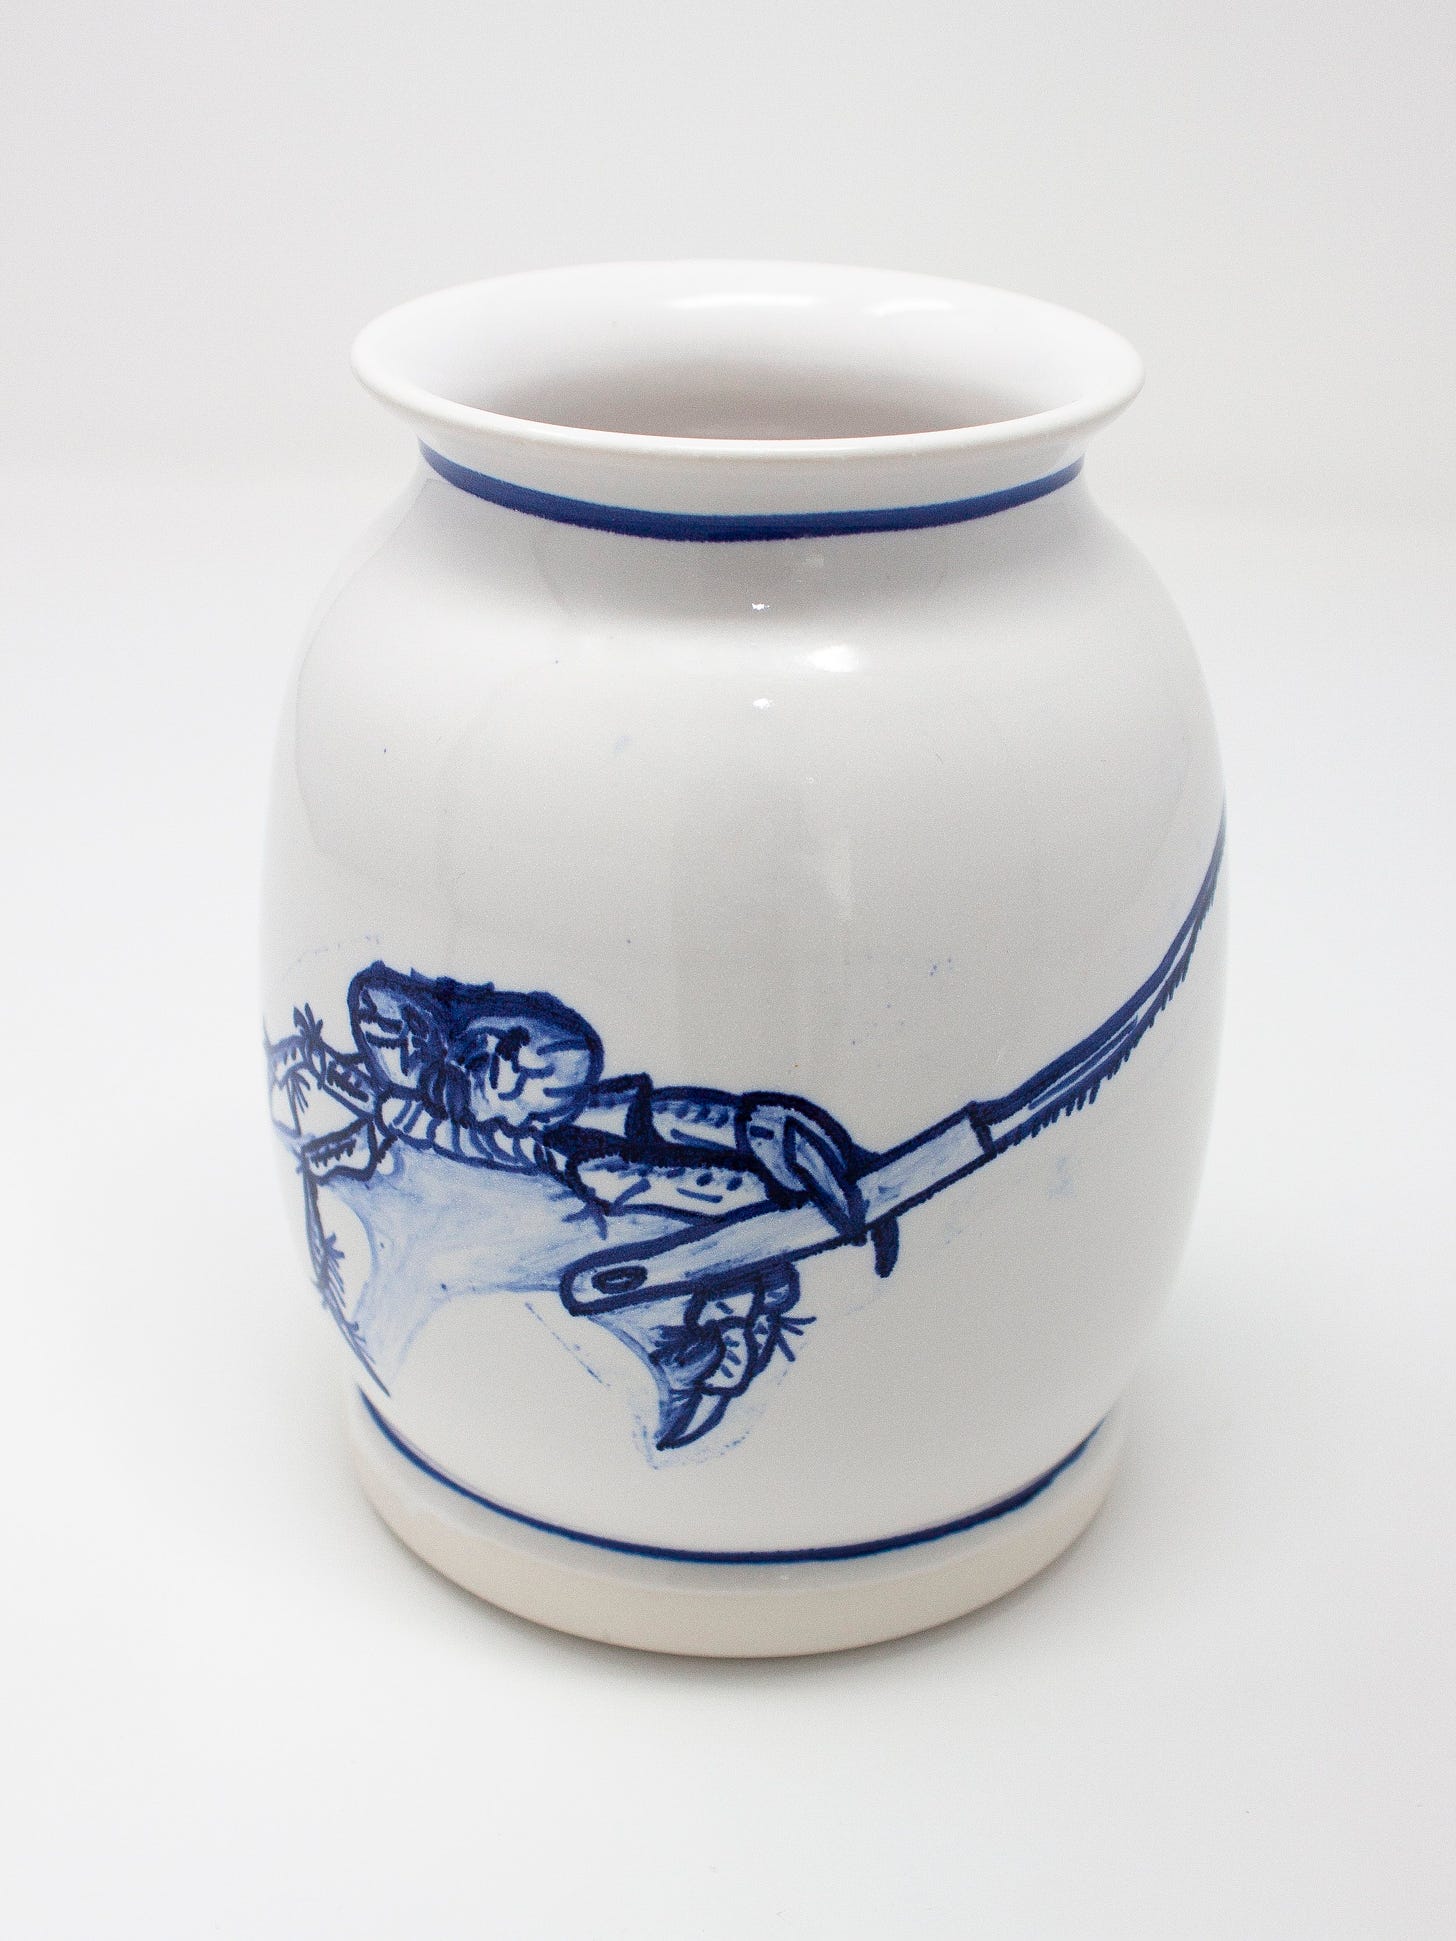 A beautiful white pottery vase with blue stripe details, and a blue painting of a crab holding a knife glazed onto it. 